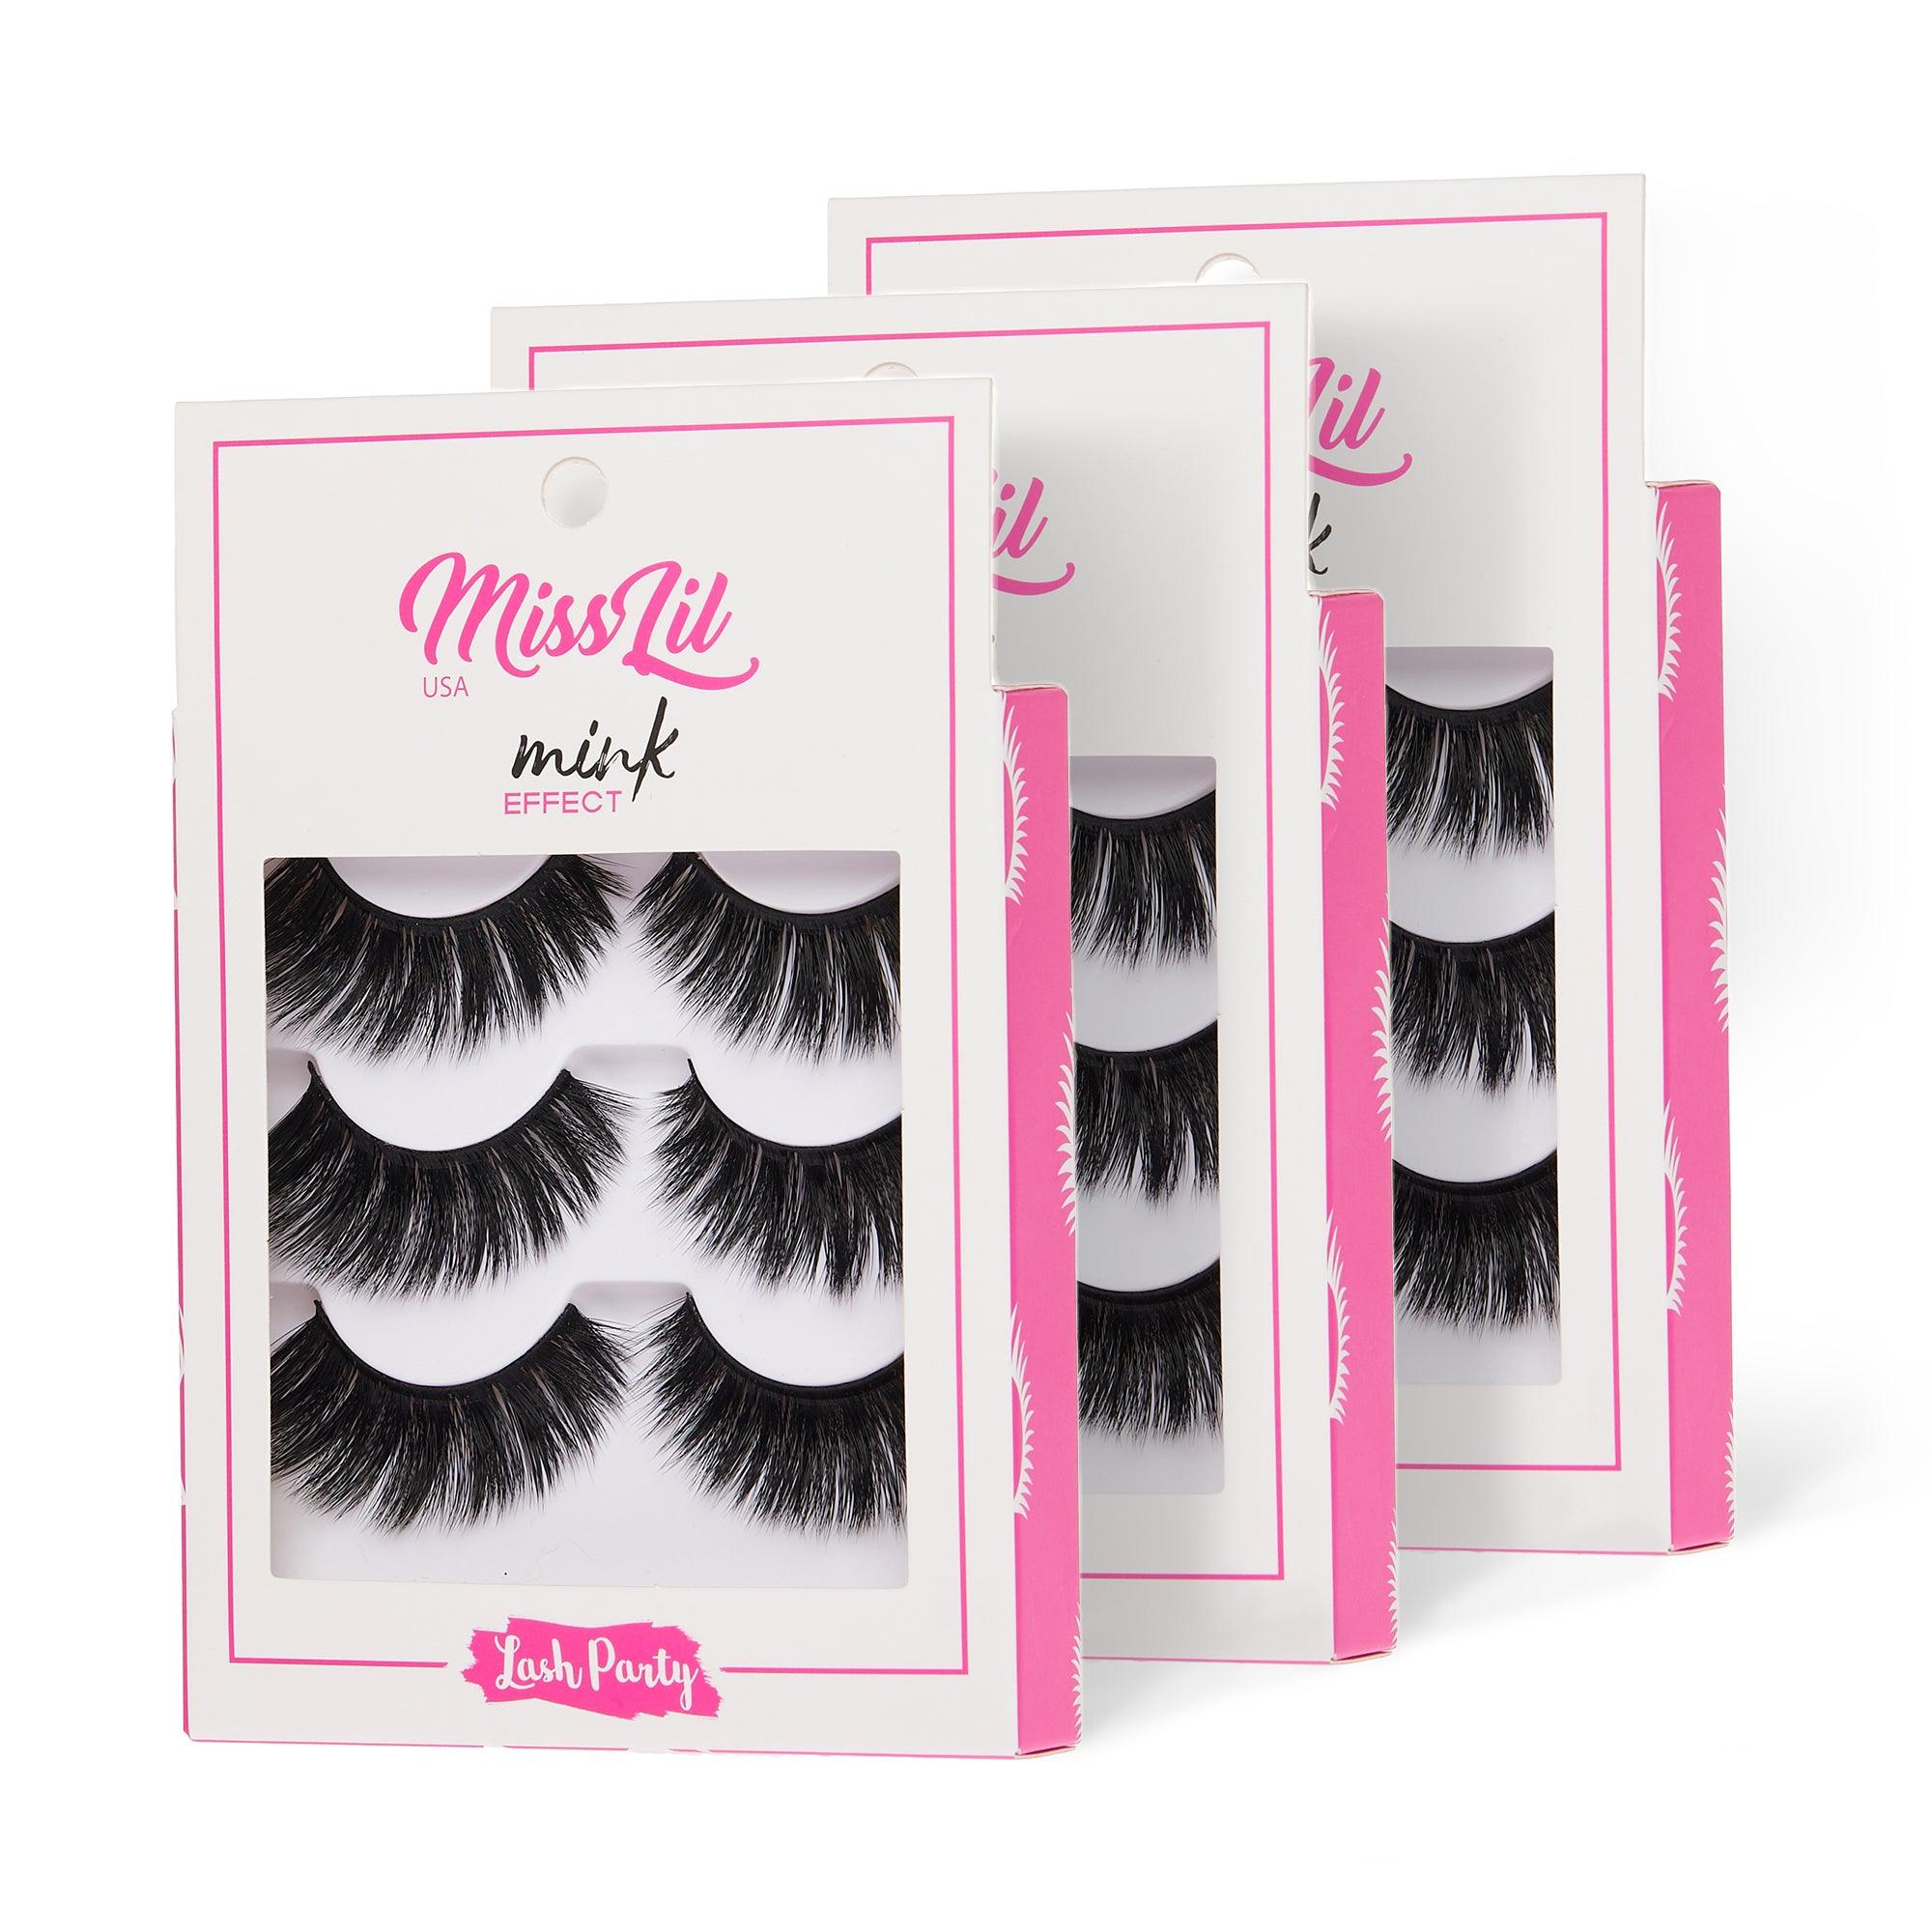 3-Pair Faux Mink Effect Eyelashes - Lash Party Collection #18 - Pack of 3 - Miss Lil USA